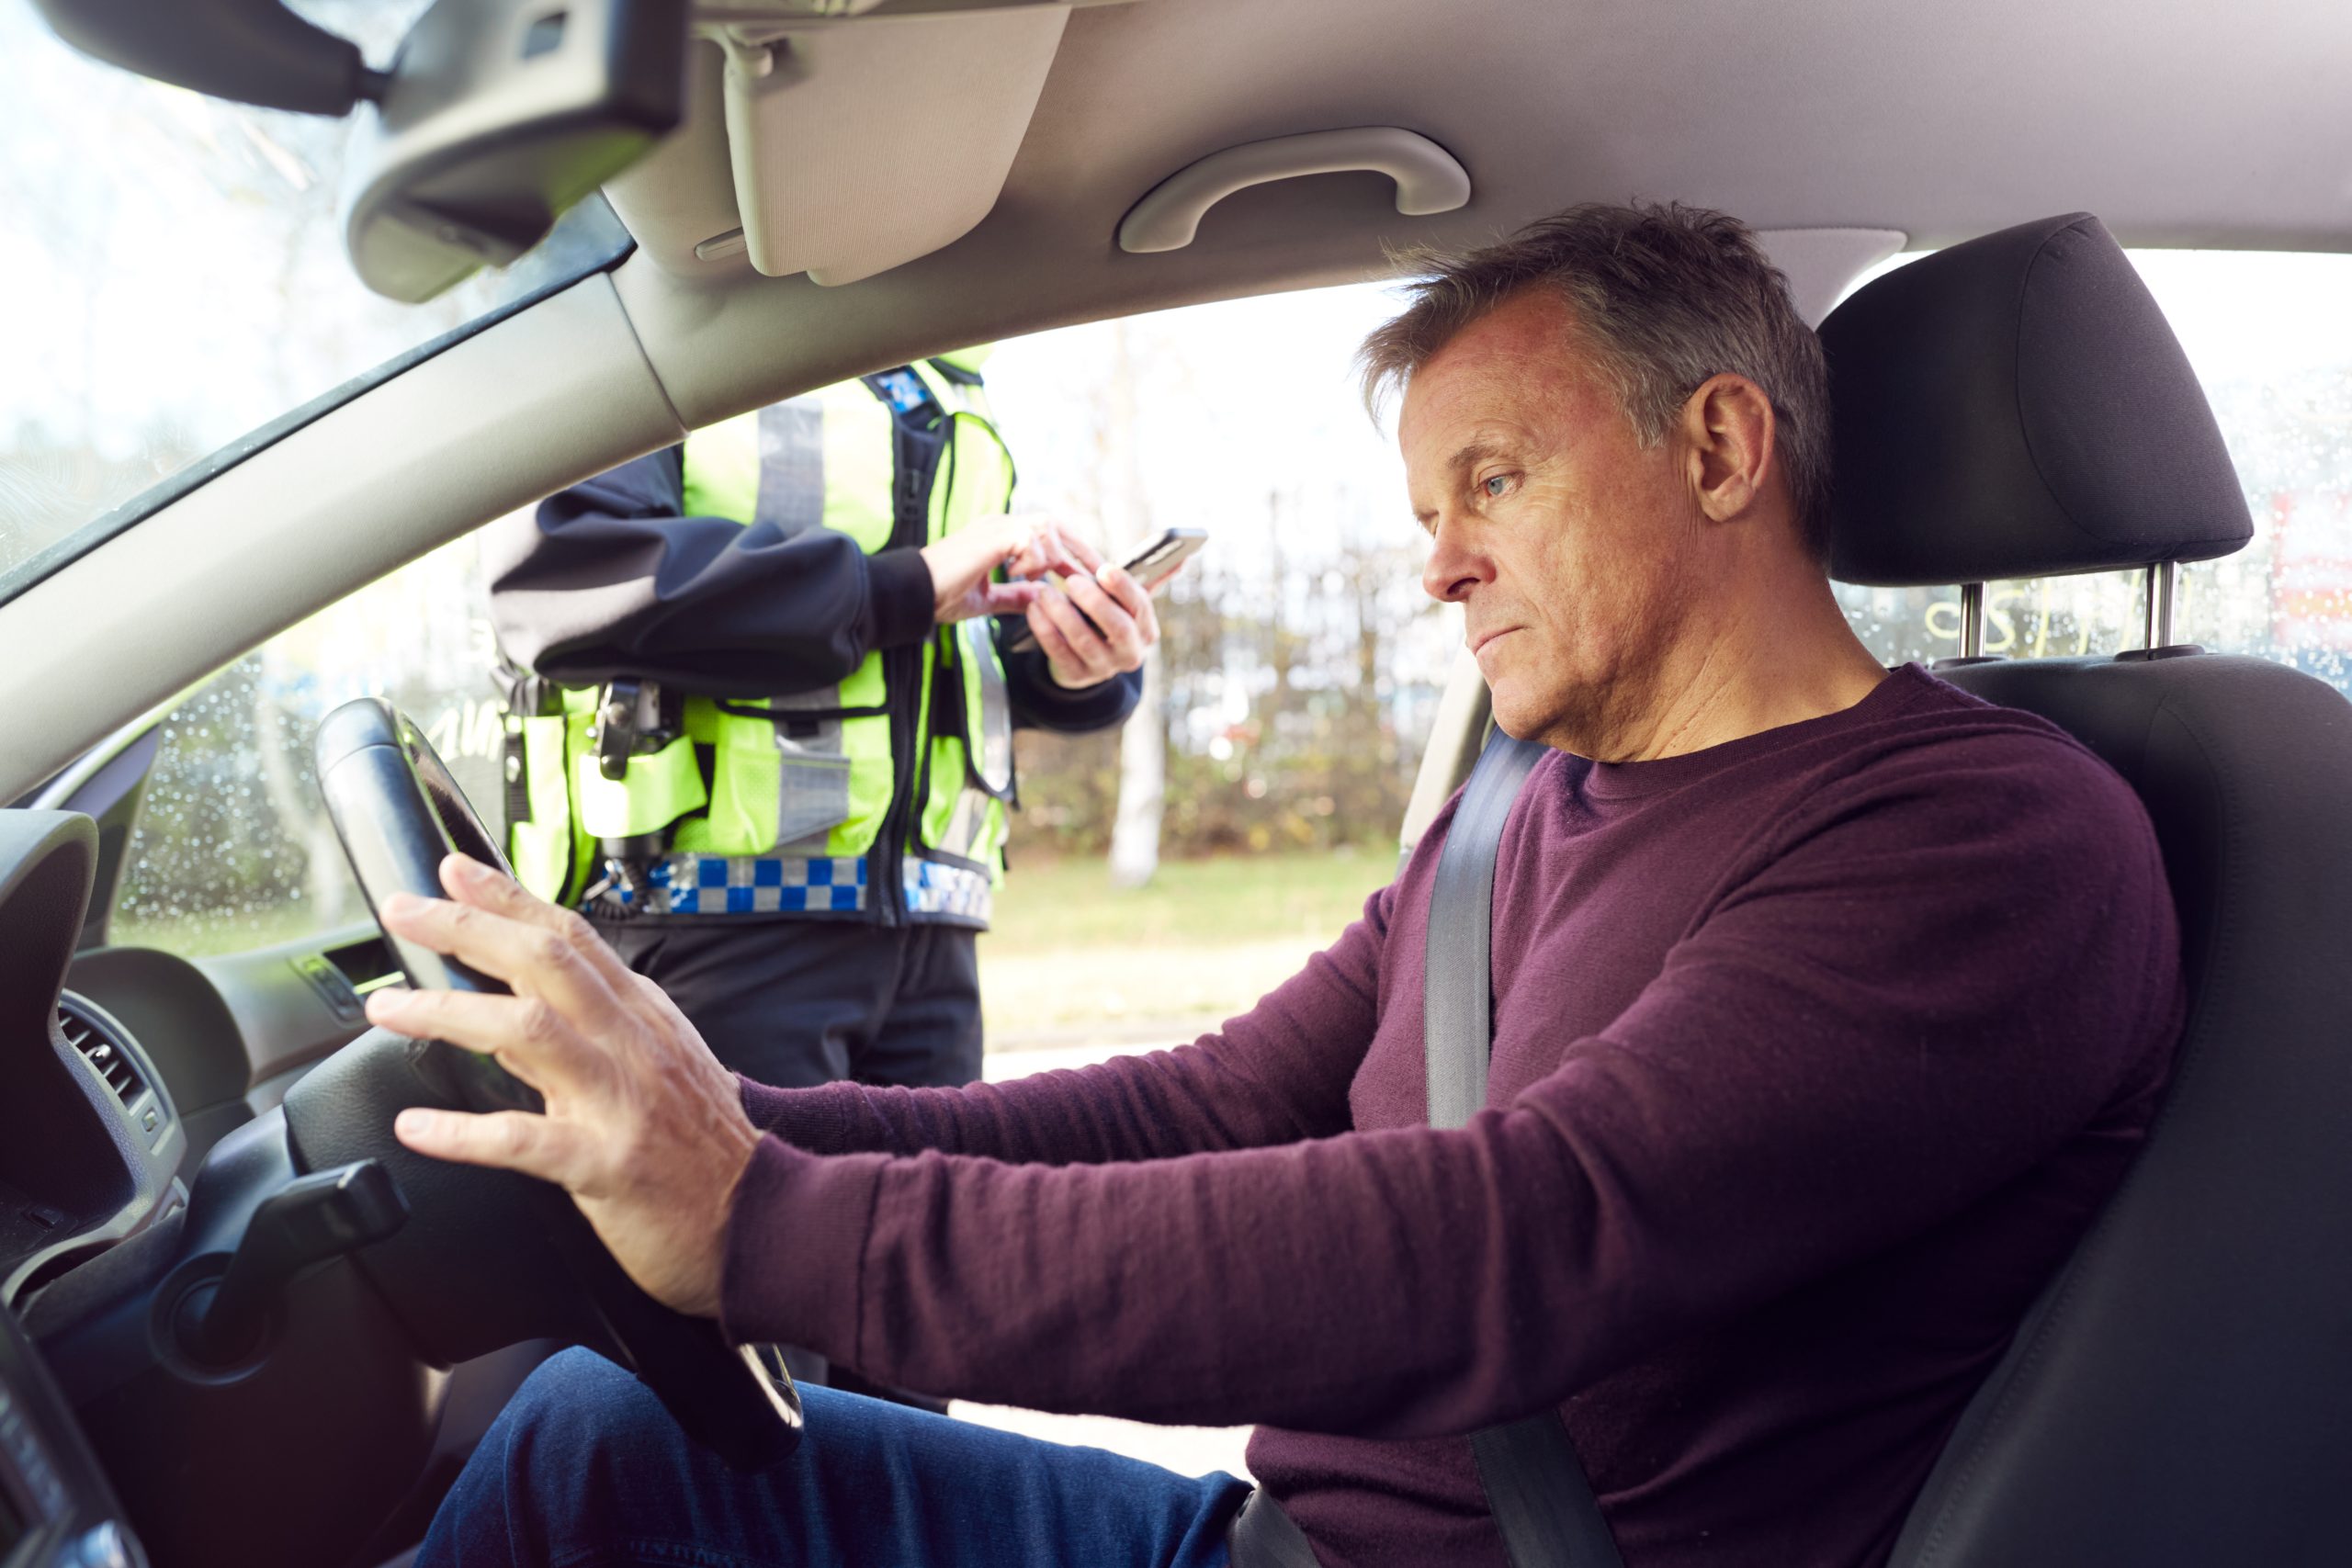 How to prevent dui accidents?